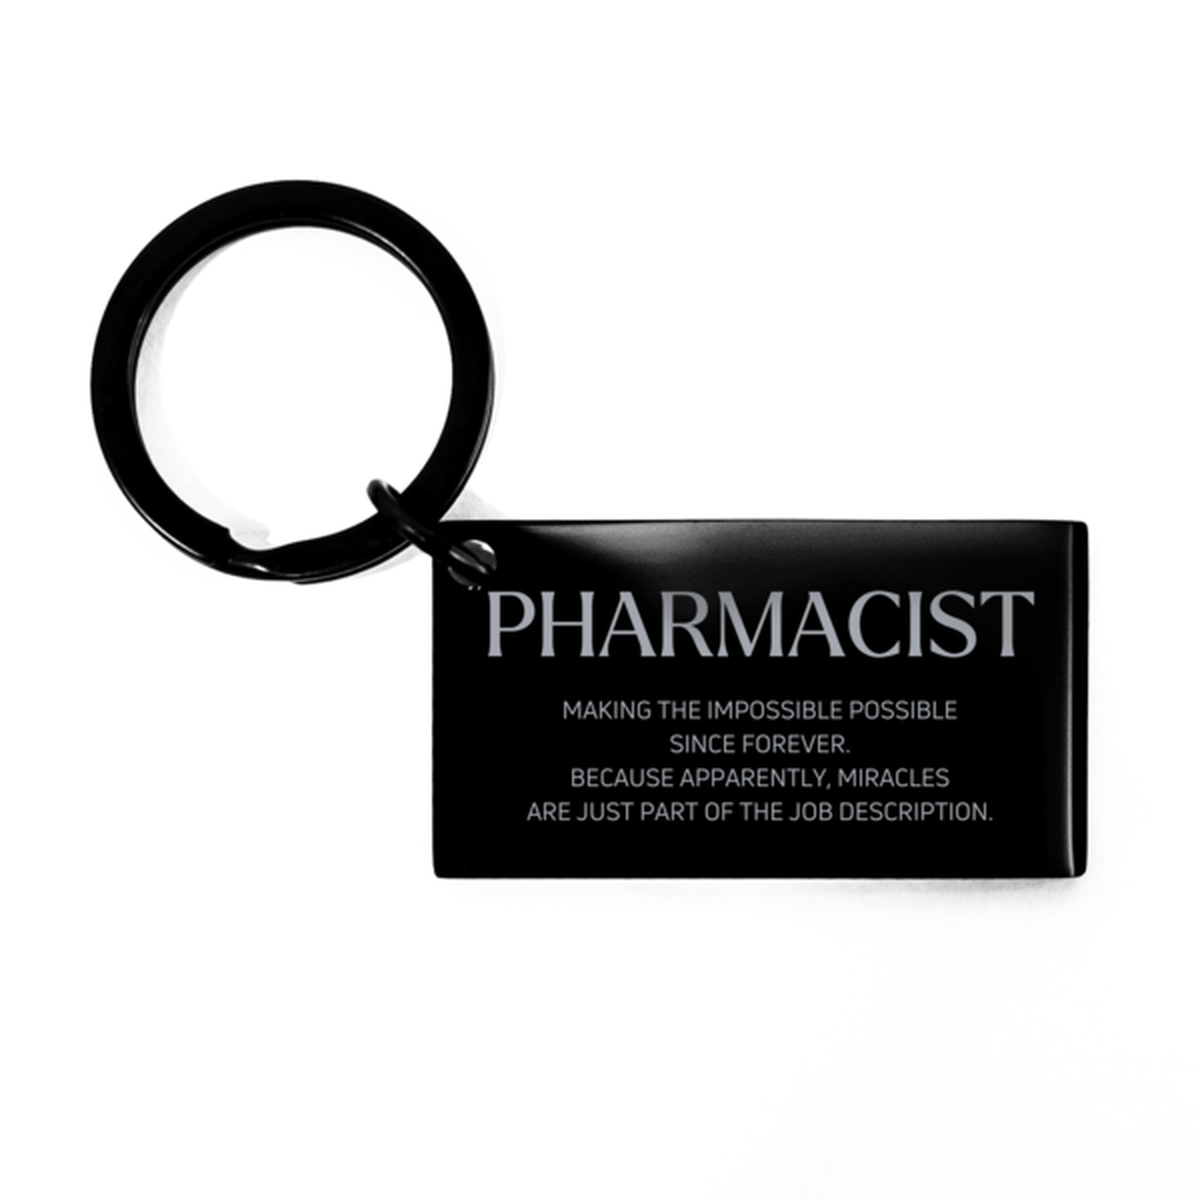 Funny Pharmacist Gifts, Miracles are just part of the job description, Inspirational Birthday Keychain For Pharmacist, Men, Women, Coworkers, Friends, Boss